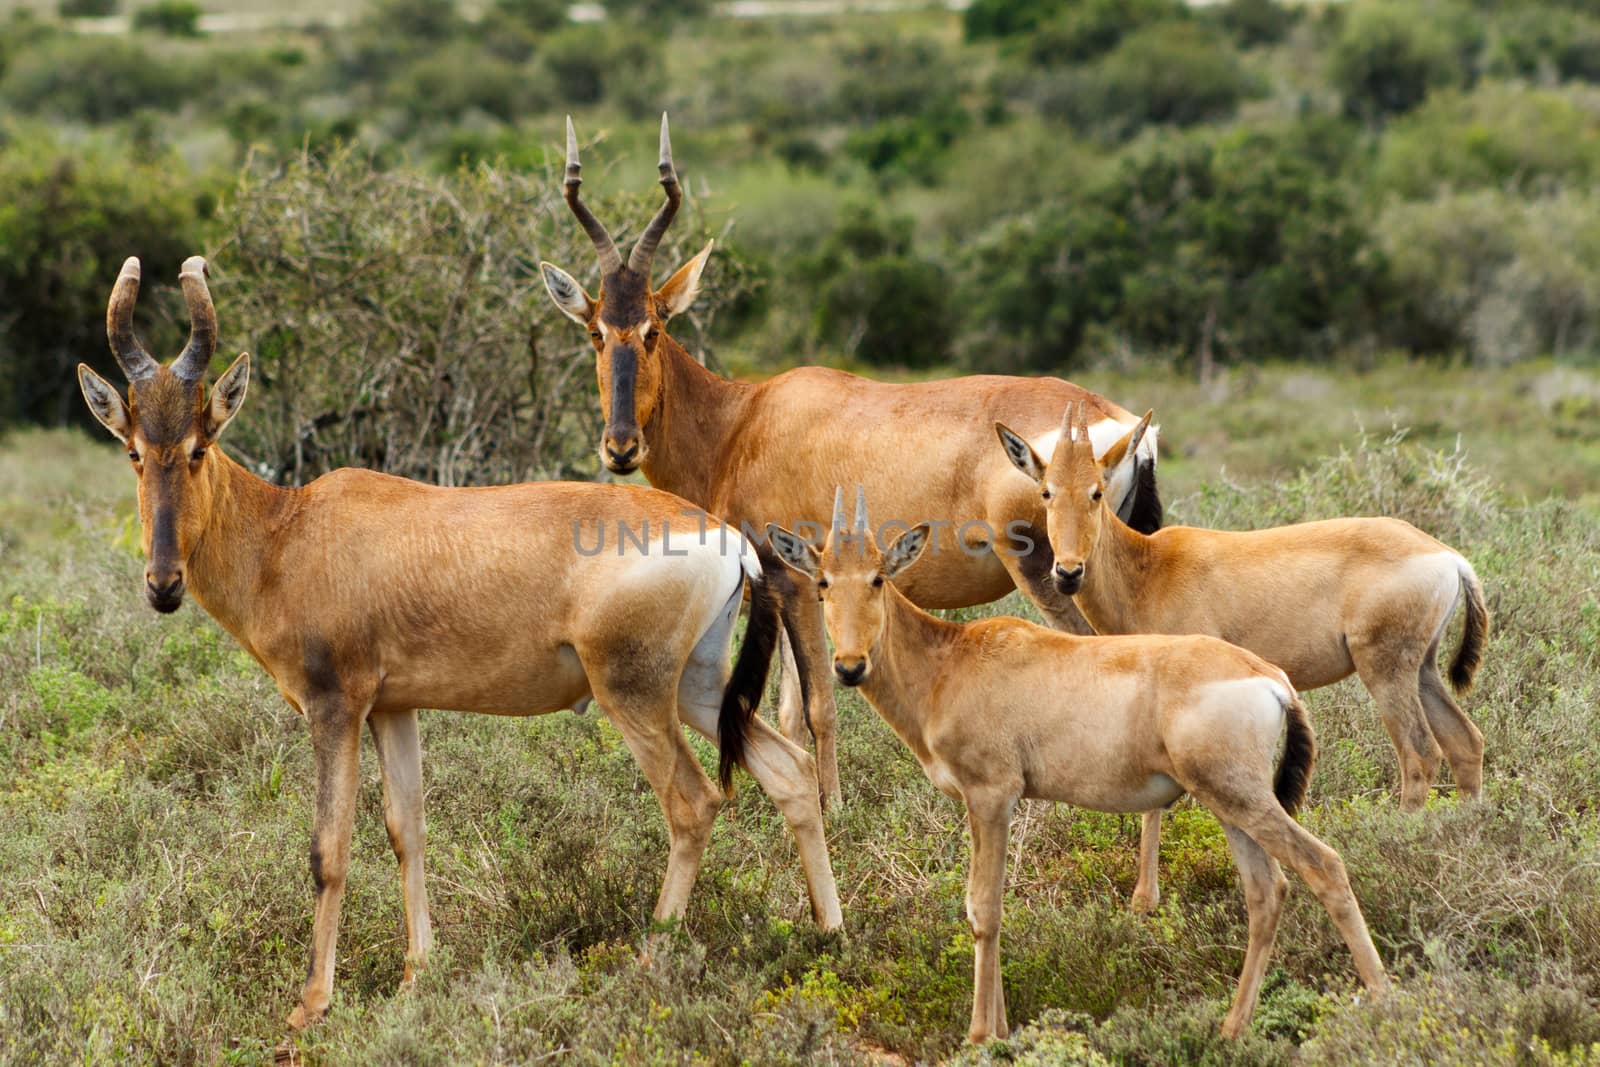 The Family - Alcelaphus buselaphus caama - The red hartebeest is a species of even-toed ungulate in the family Bovidae found in Southern Africa.